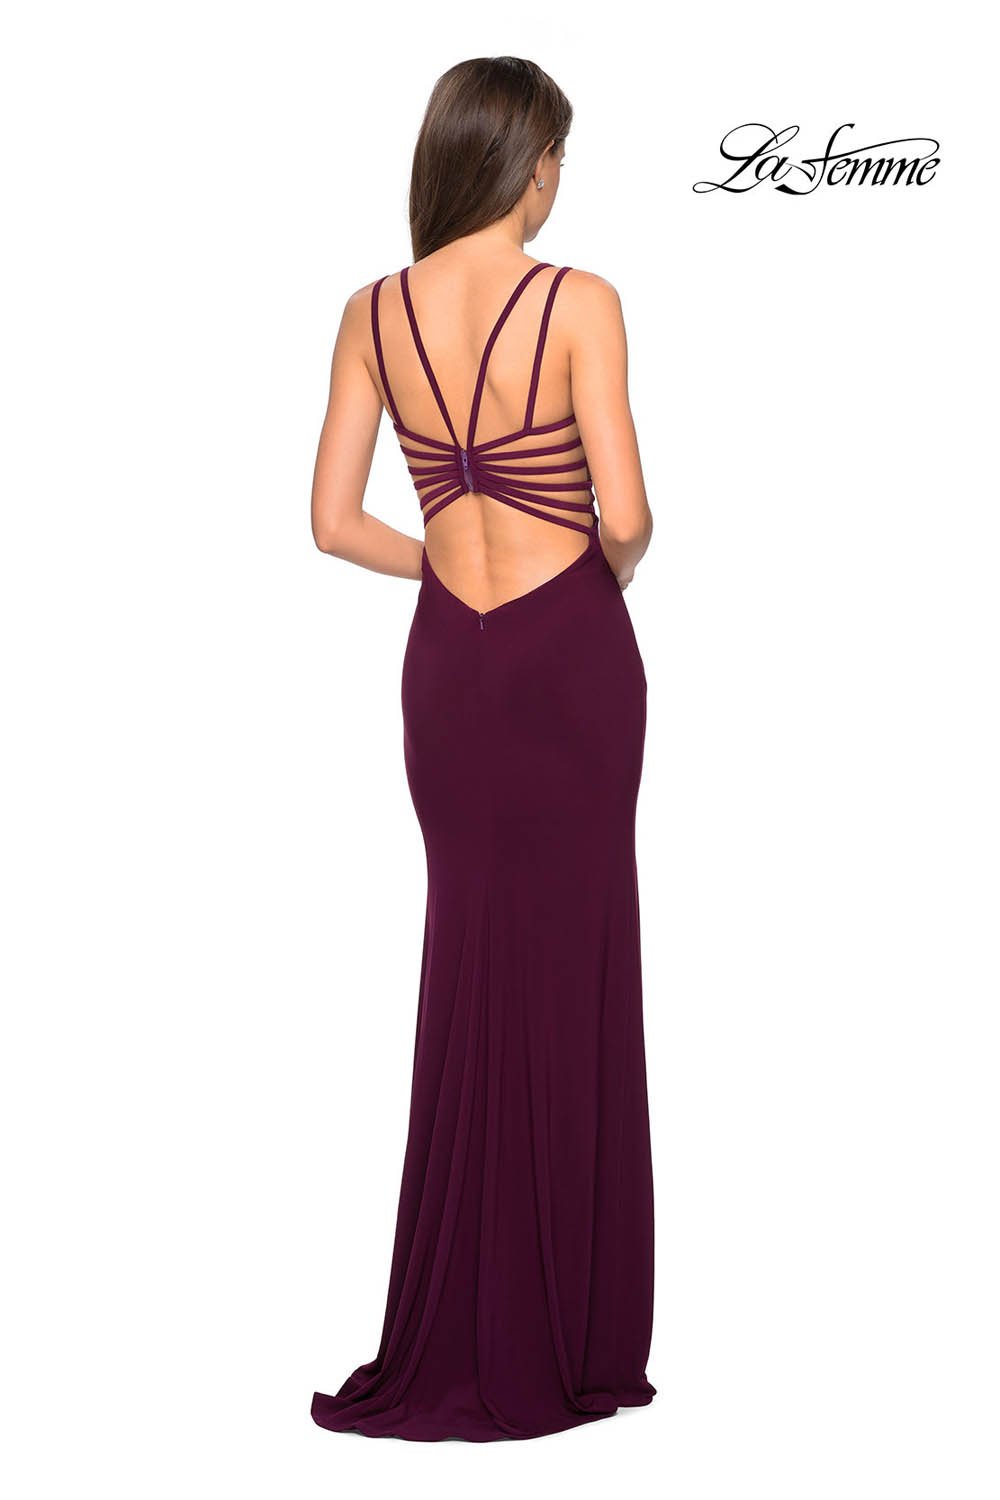 La Femme 27072 dress images in these colors: Black, Dark Berry, Royal Blue, White.